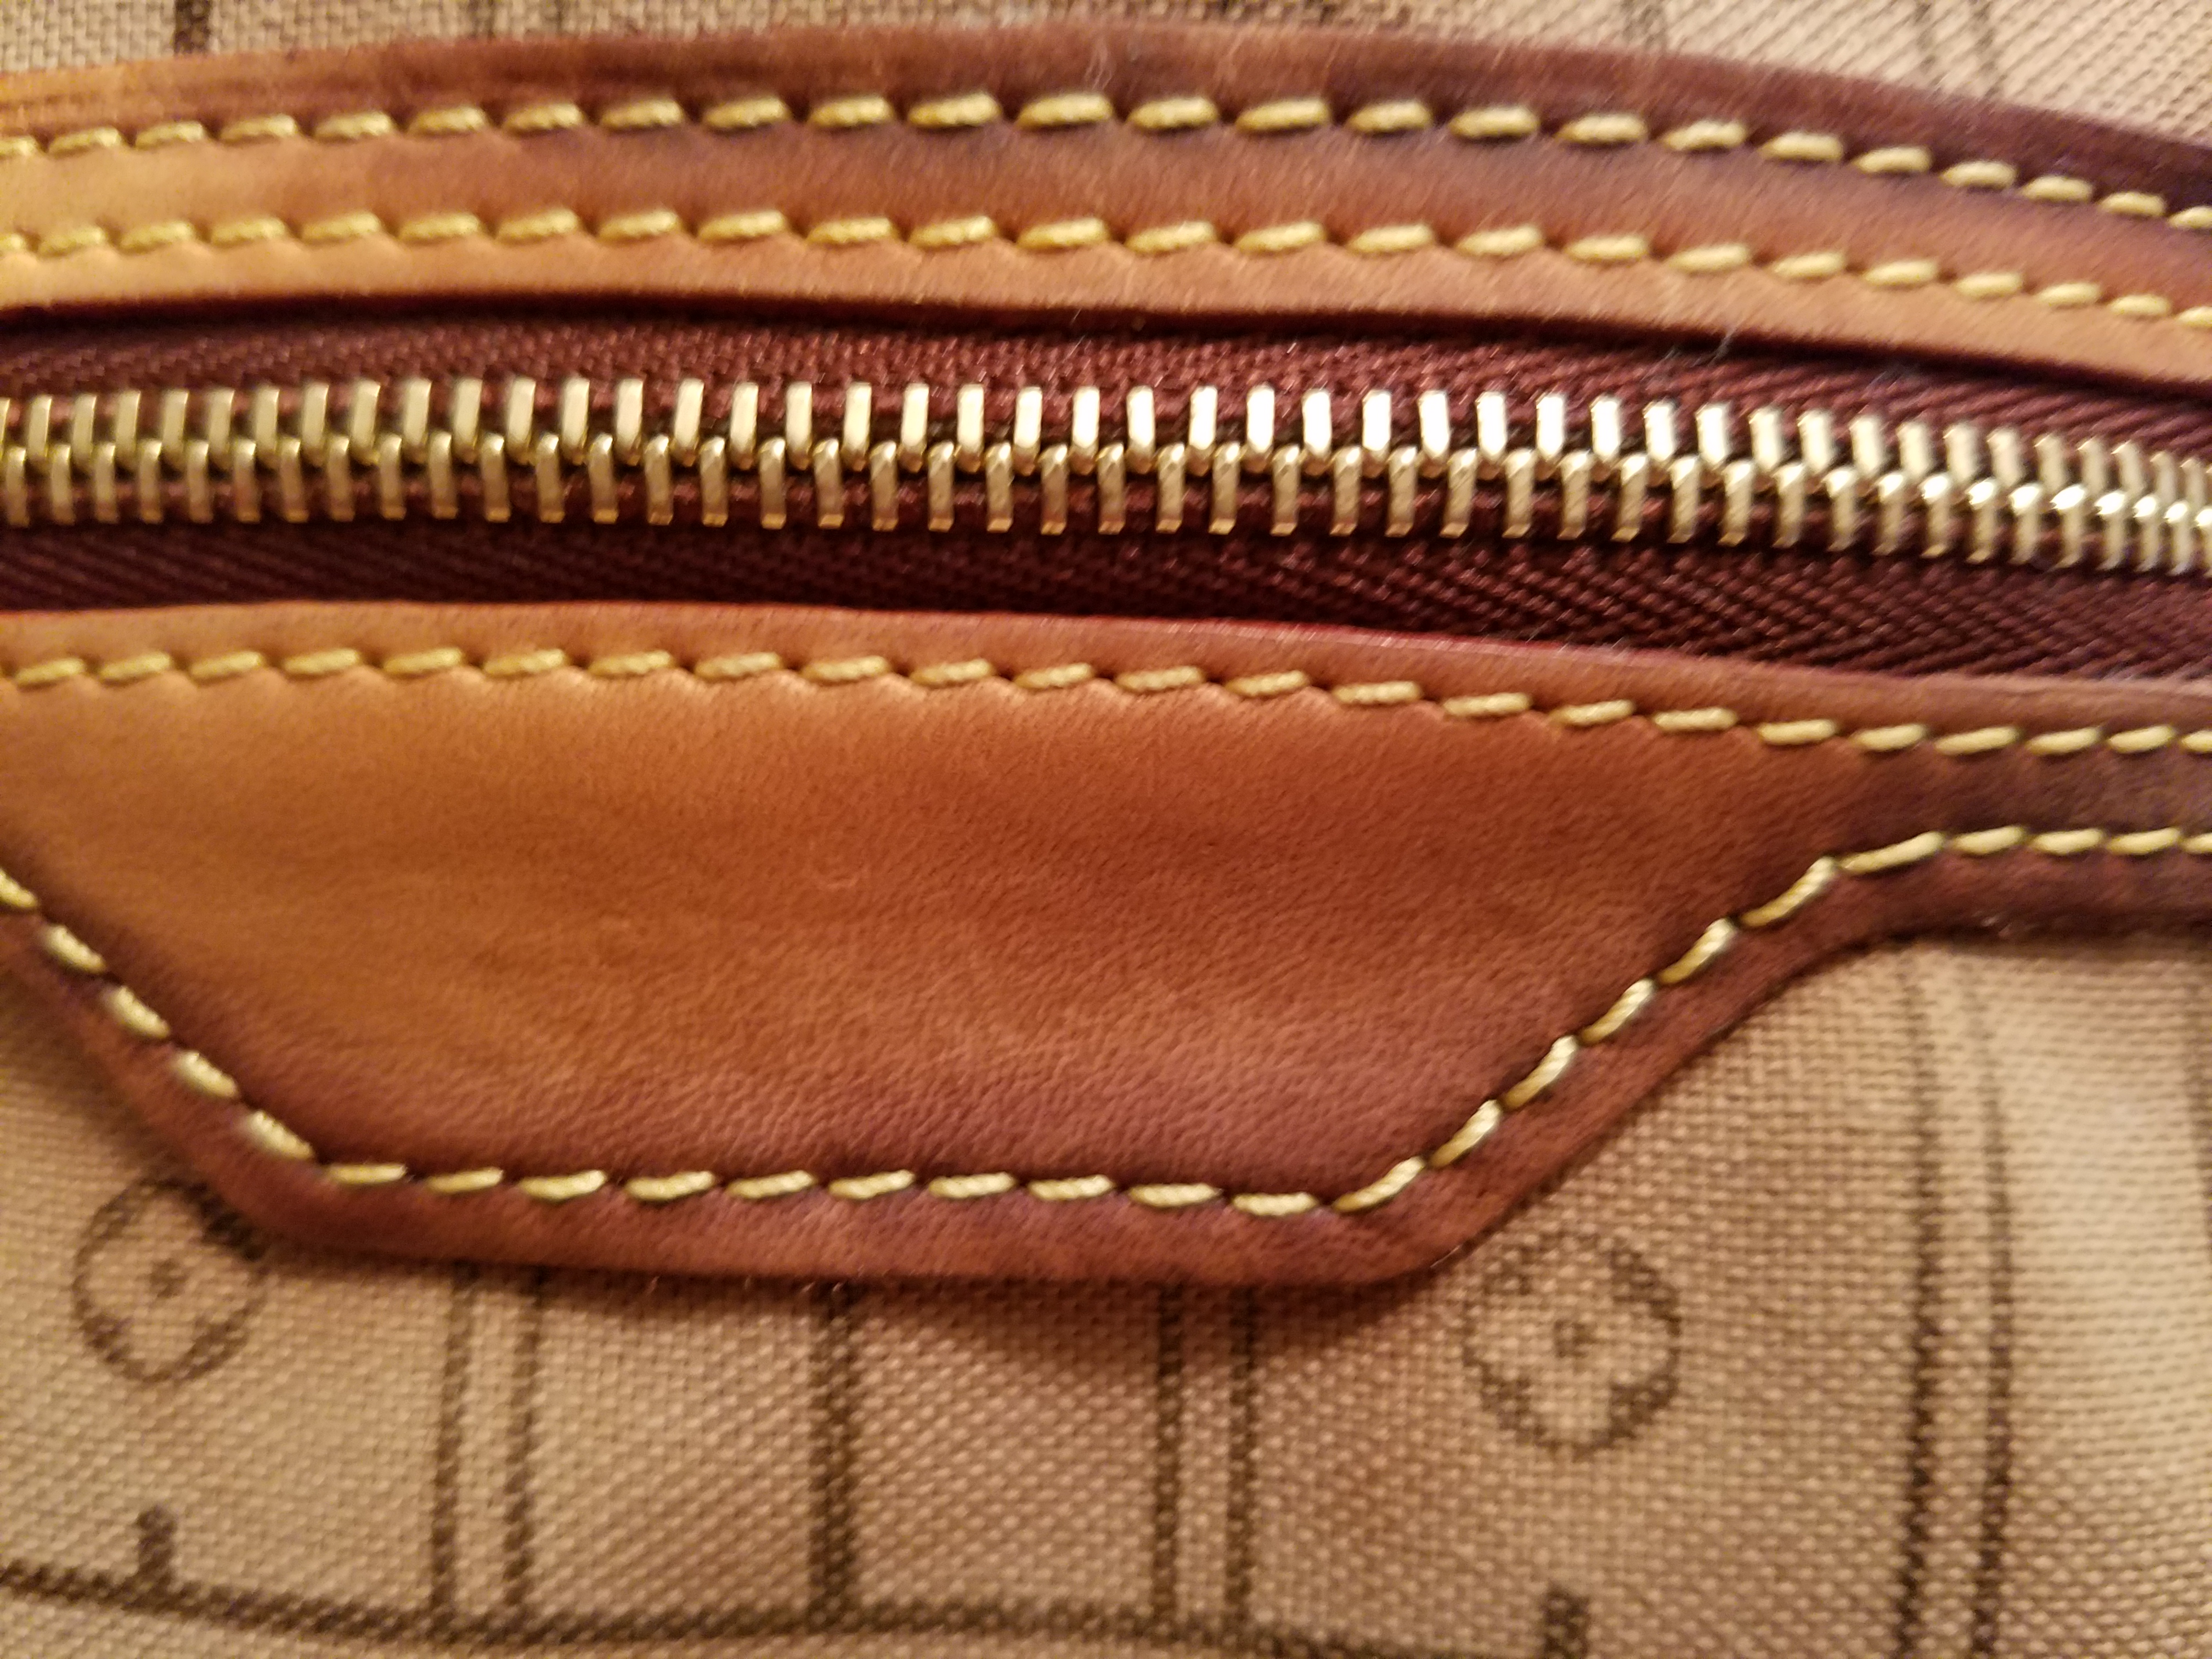 Inside pocket of neverfull ruined by wet towel with vinegar